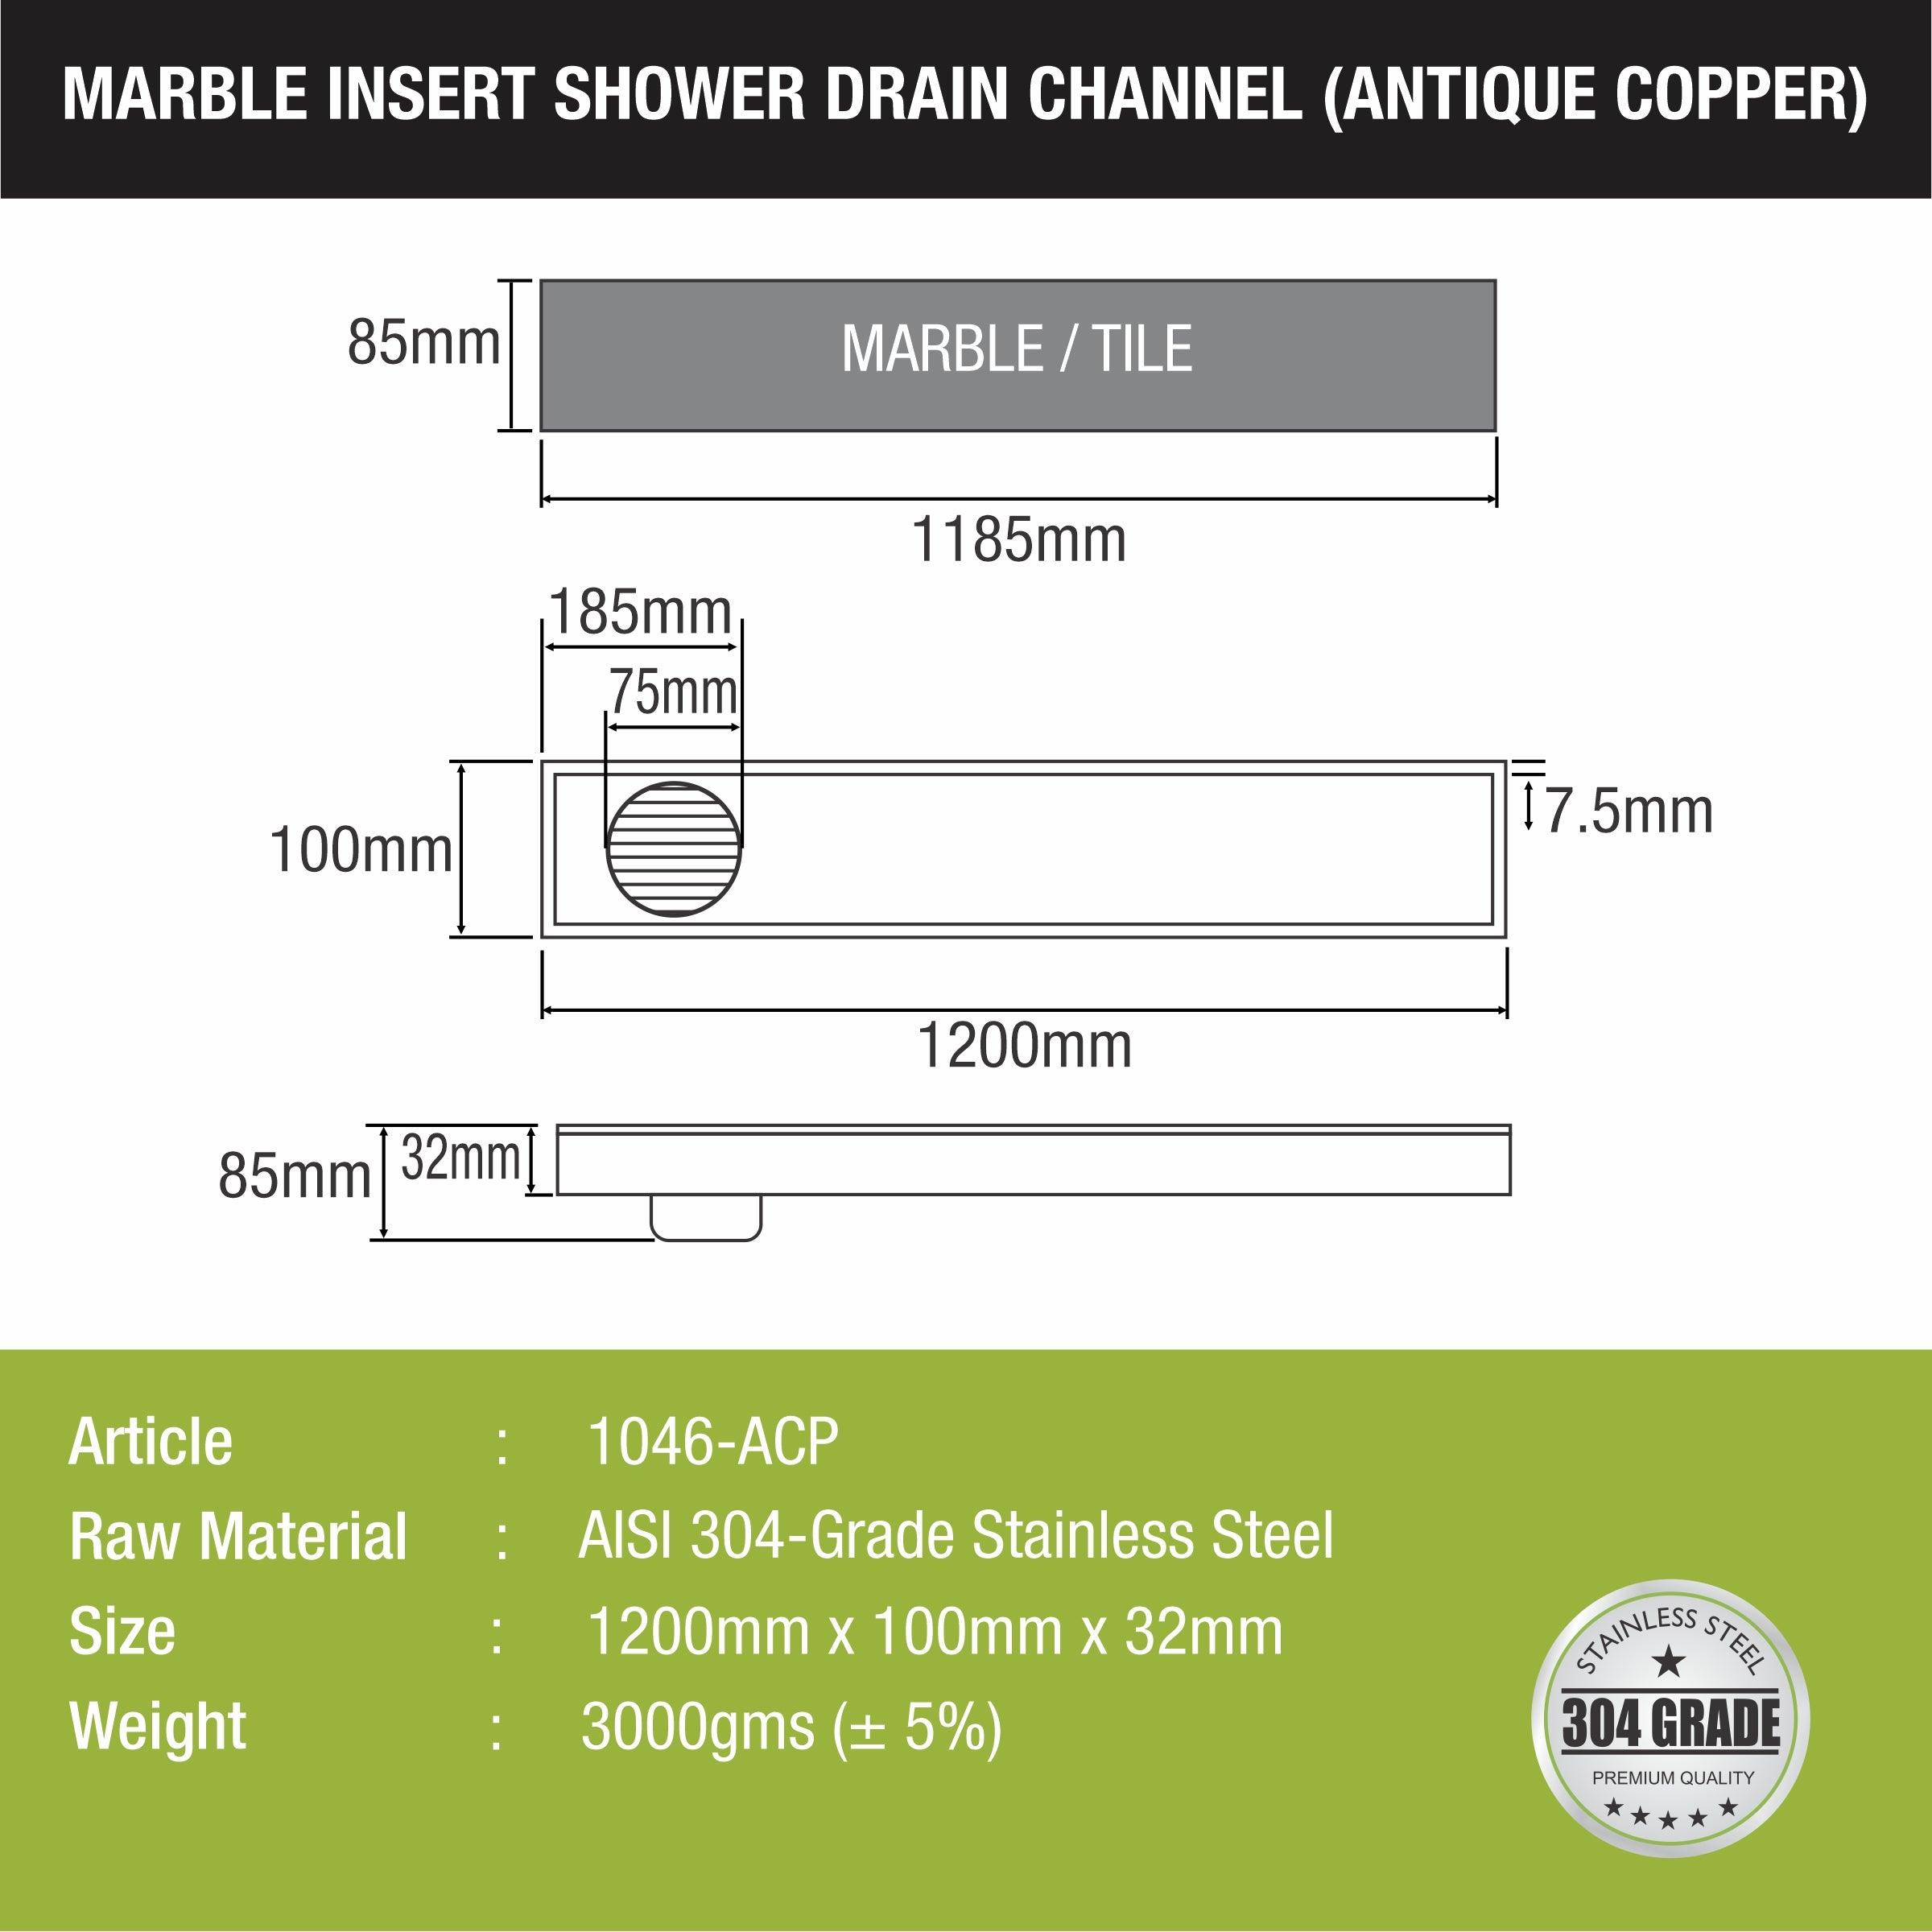 Marble Insert Shower Drain Channel - Antique Copper (48 x 4 Inches) sizes and dimensions